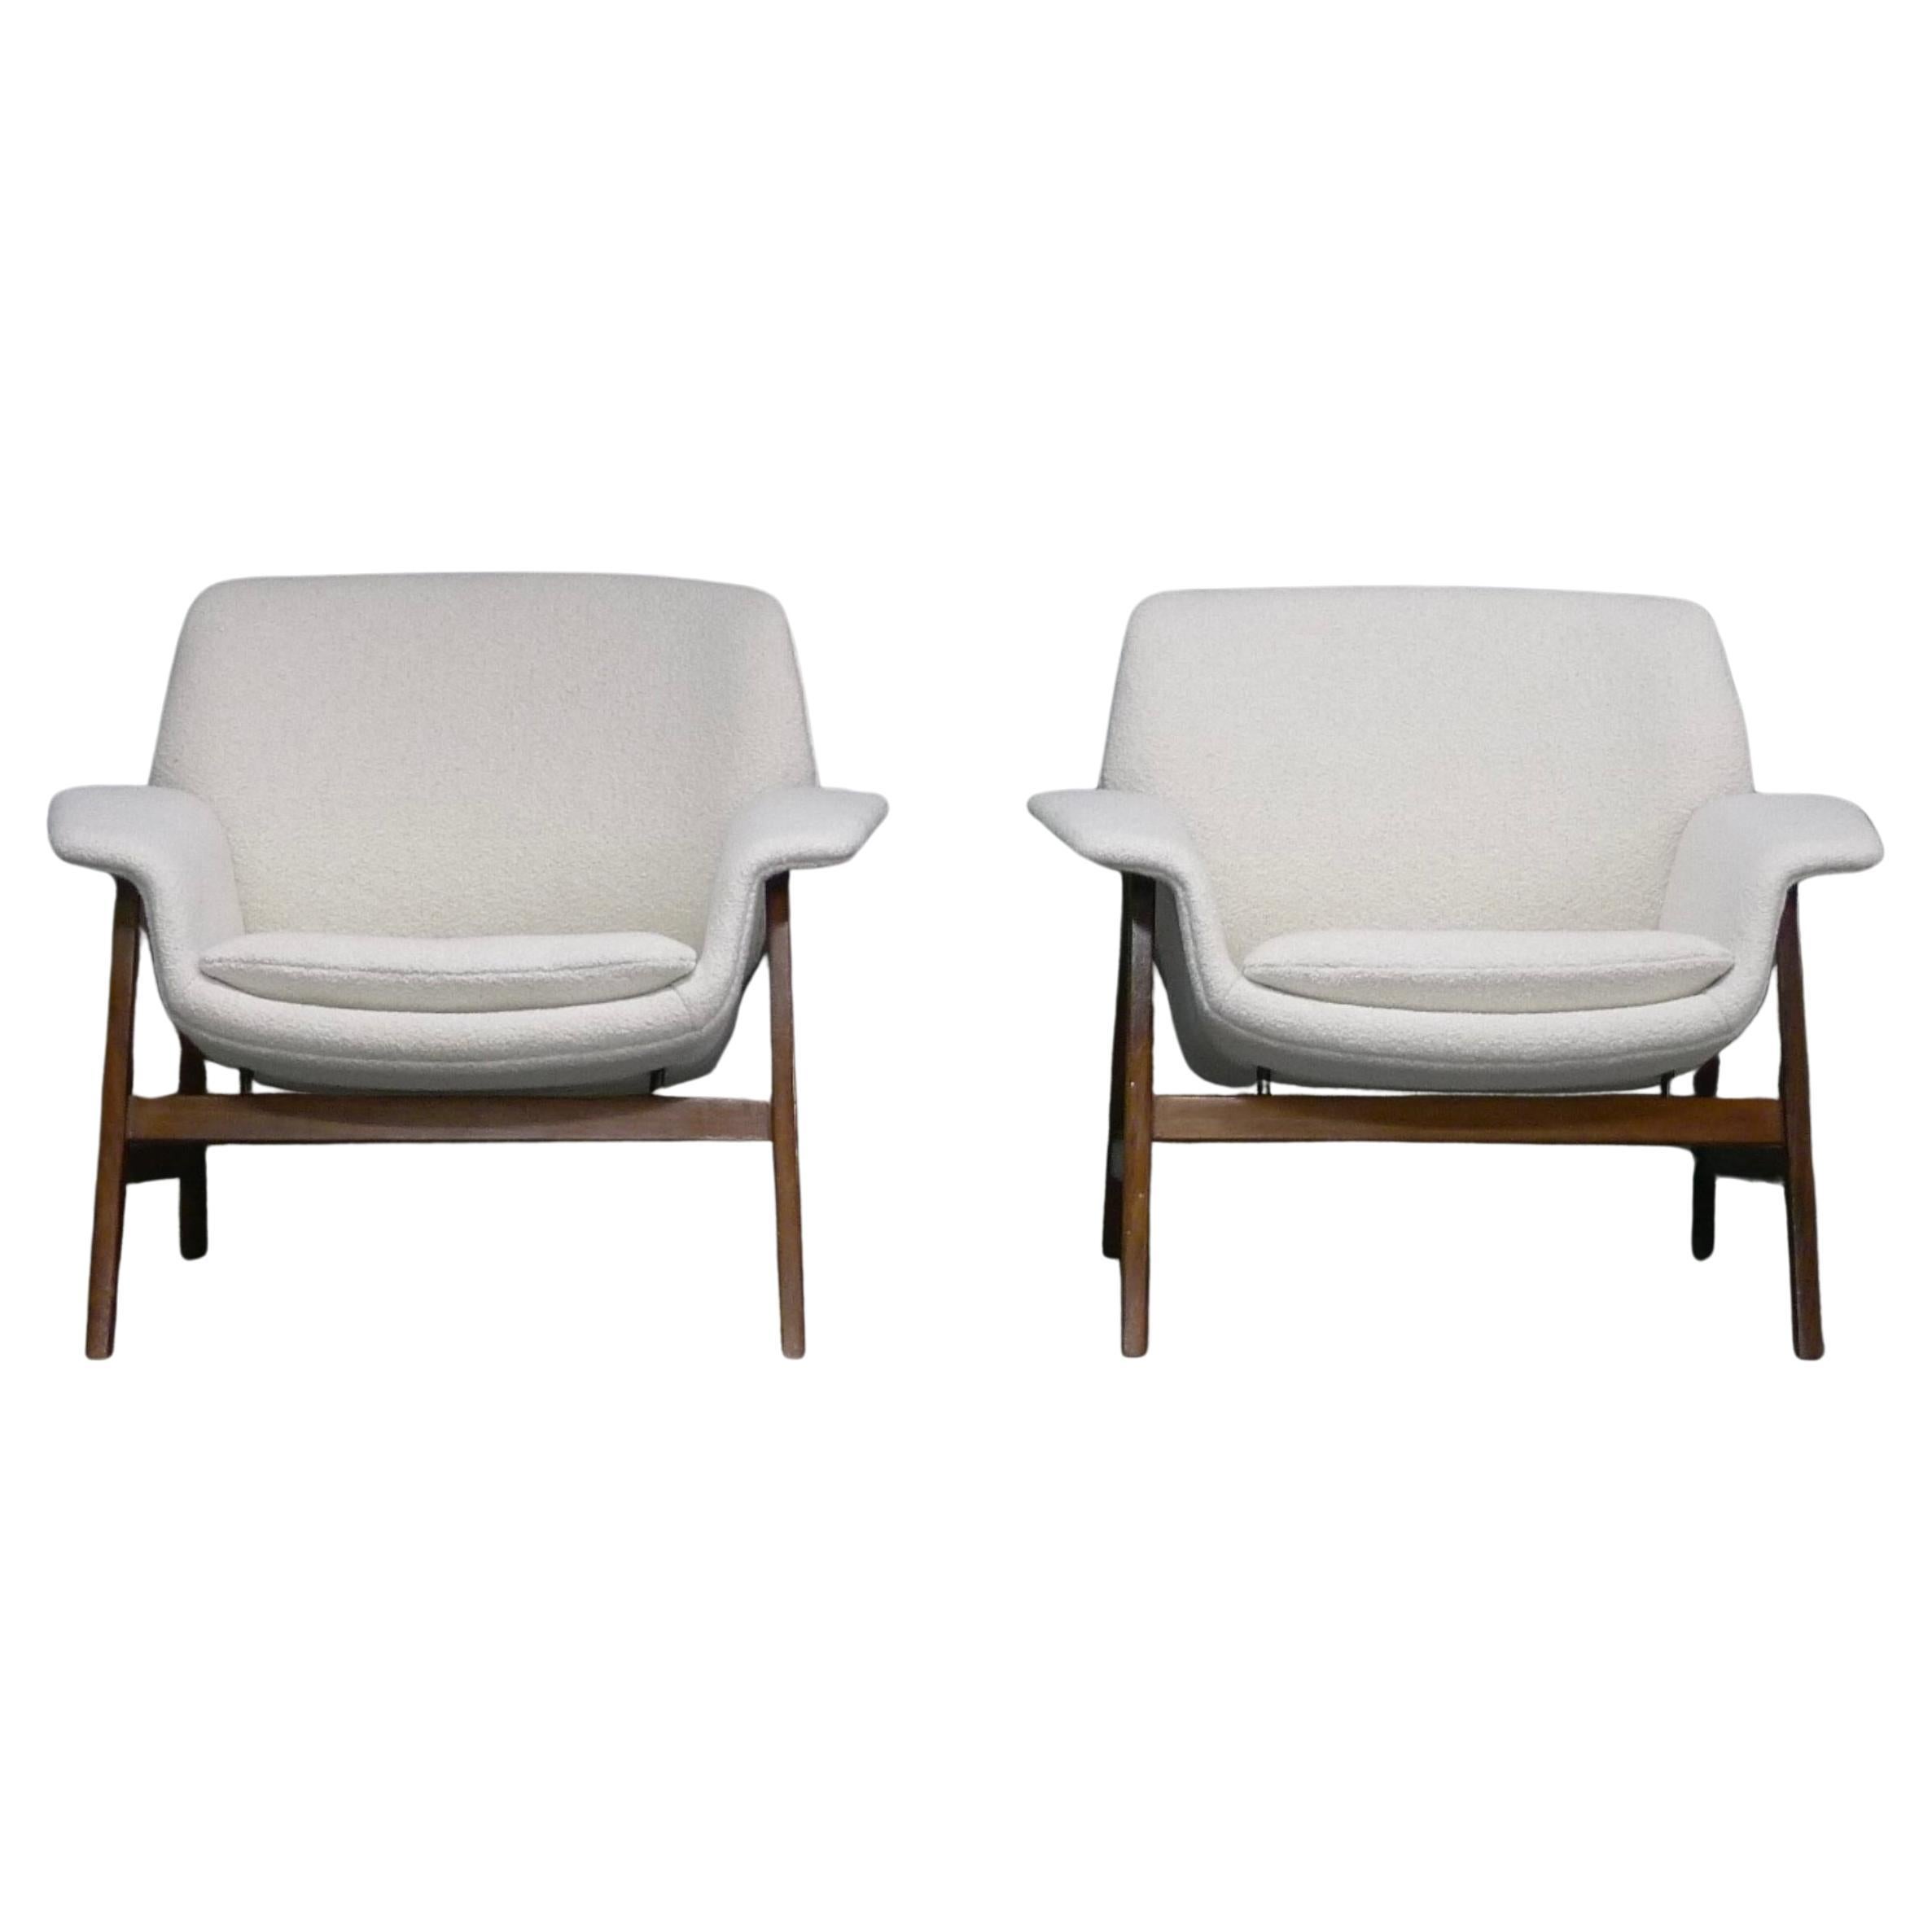 Gianfranco Frattini, Pair of Lounge Chairs, model 849 for Cassina, 1950s For Sale